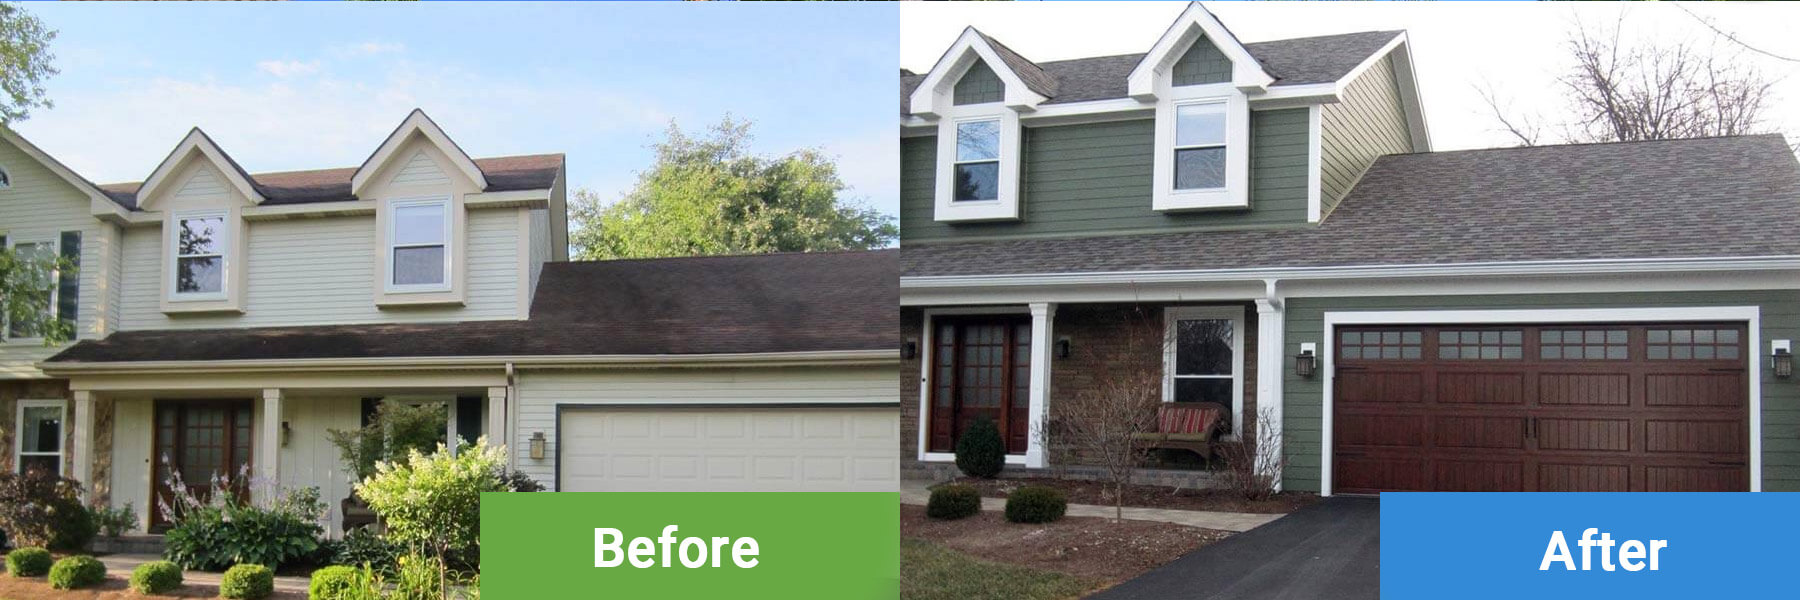 Exterior Renovations Before & After 